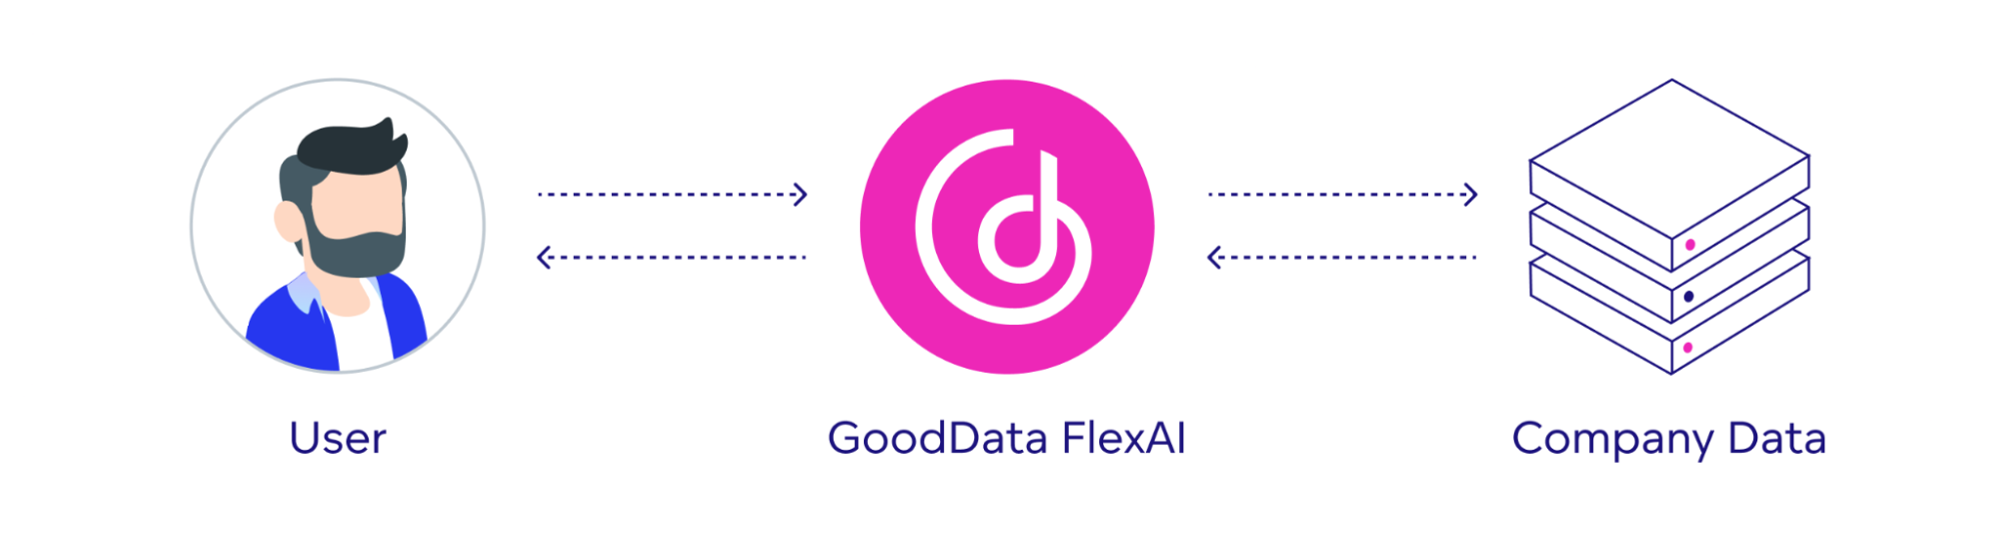 GoodData's FlexAI assistant receives the user's query, queries the company data to retrieve results, and returns them to the user.